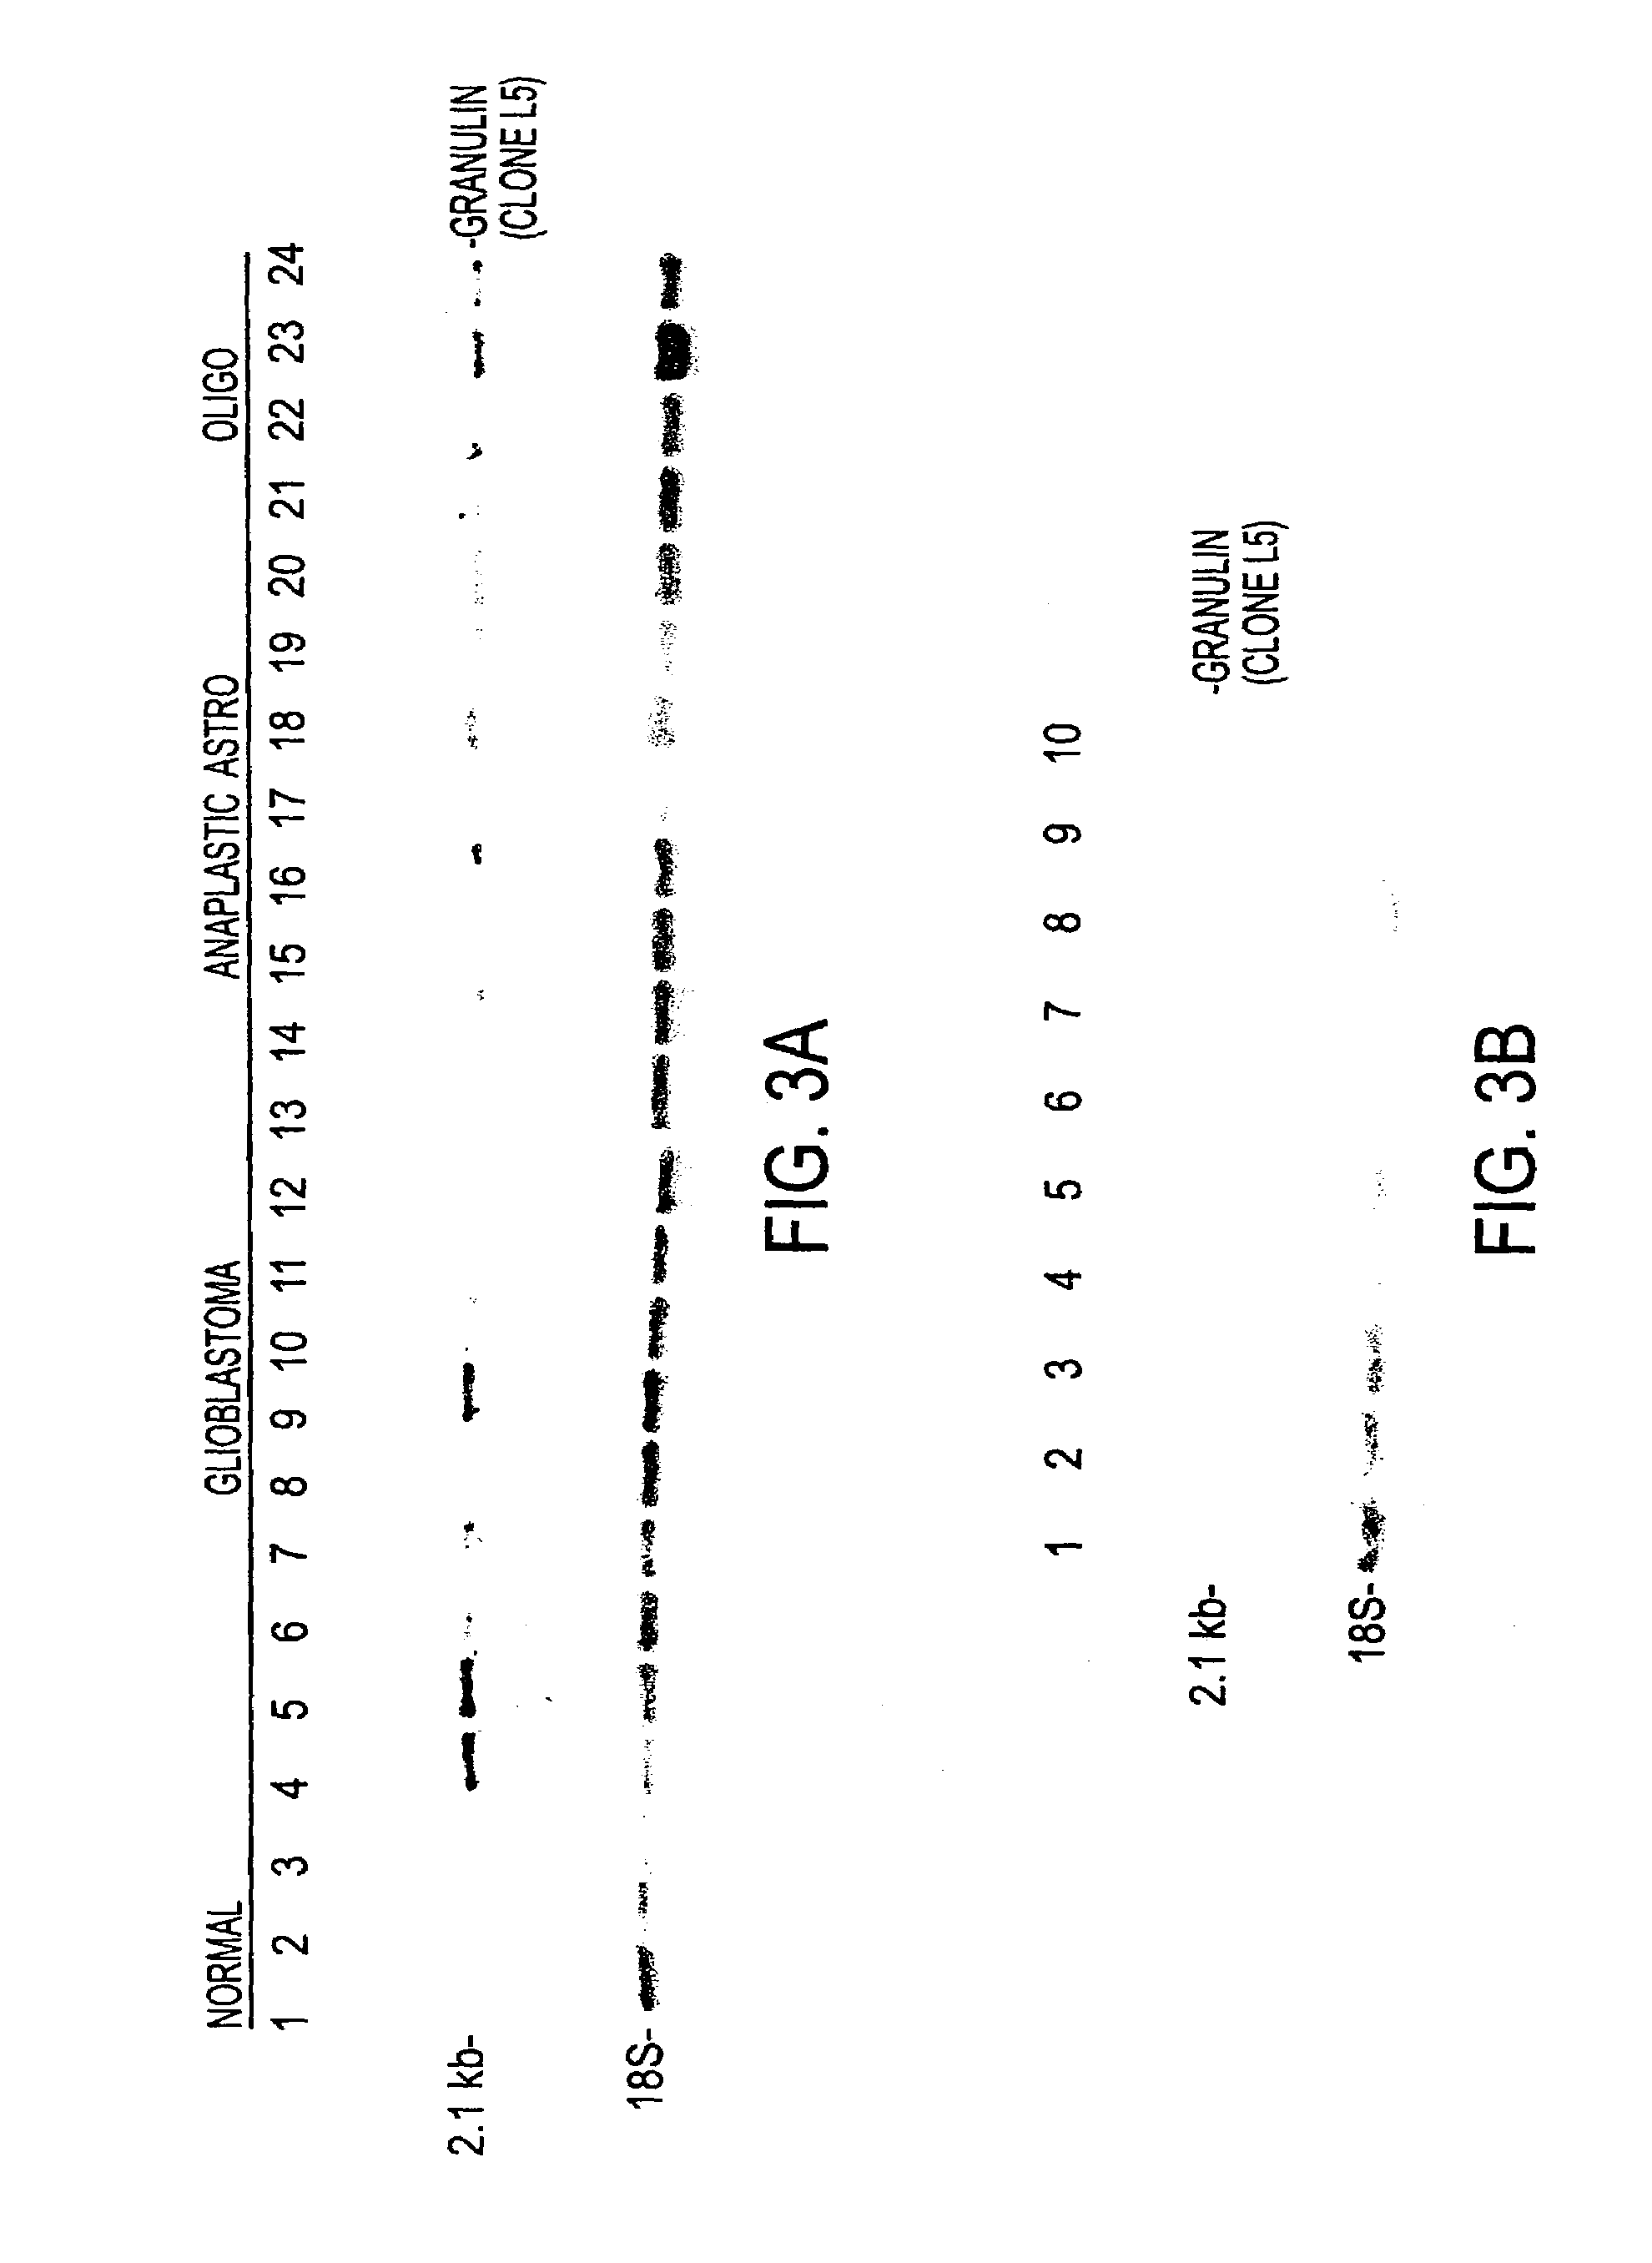 Methods for detection and treatment of neural cancers